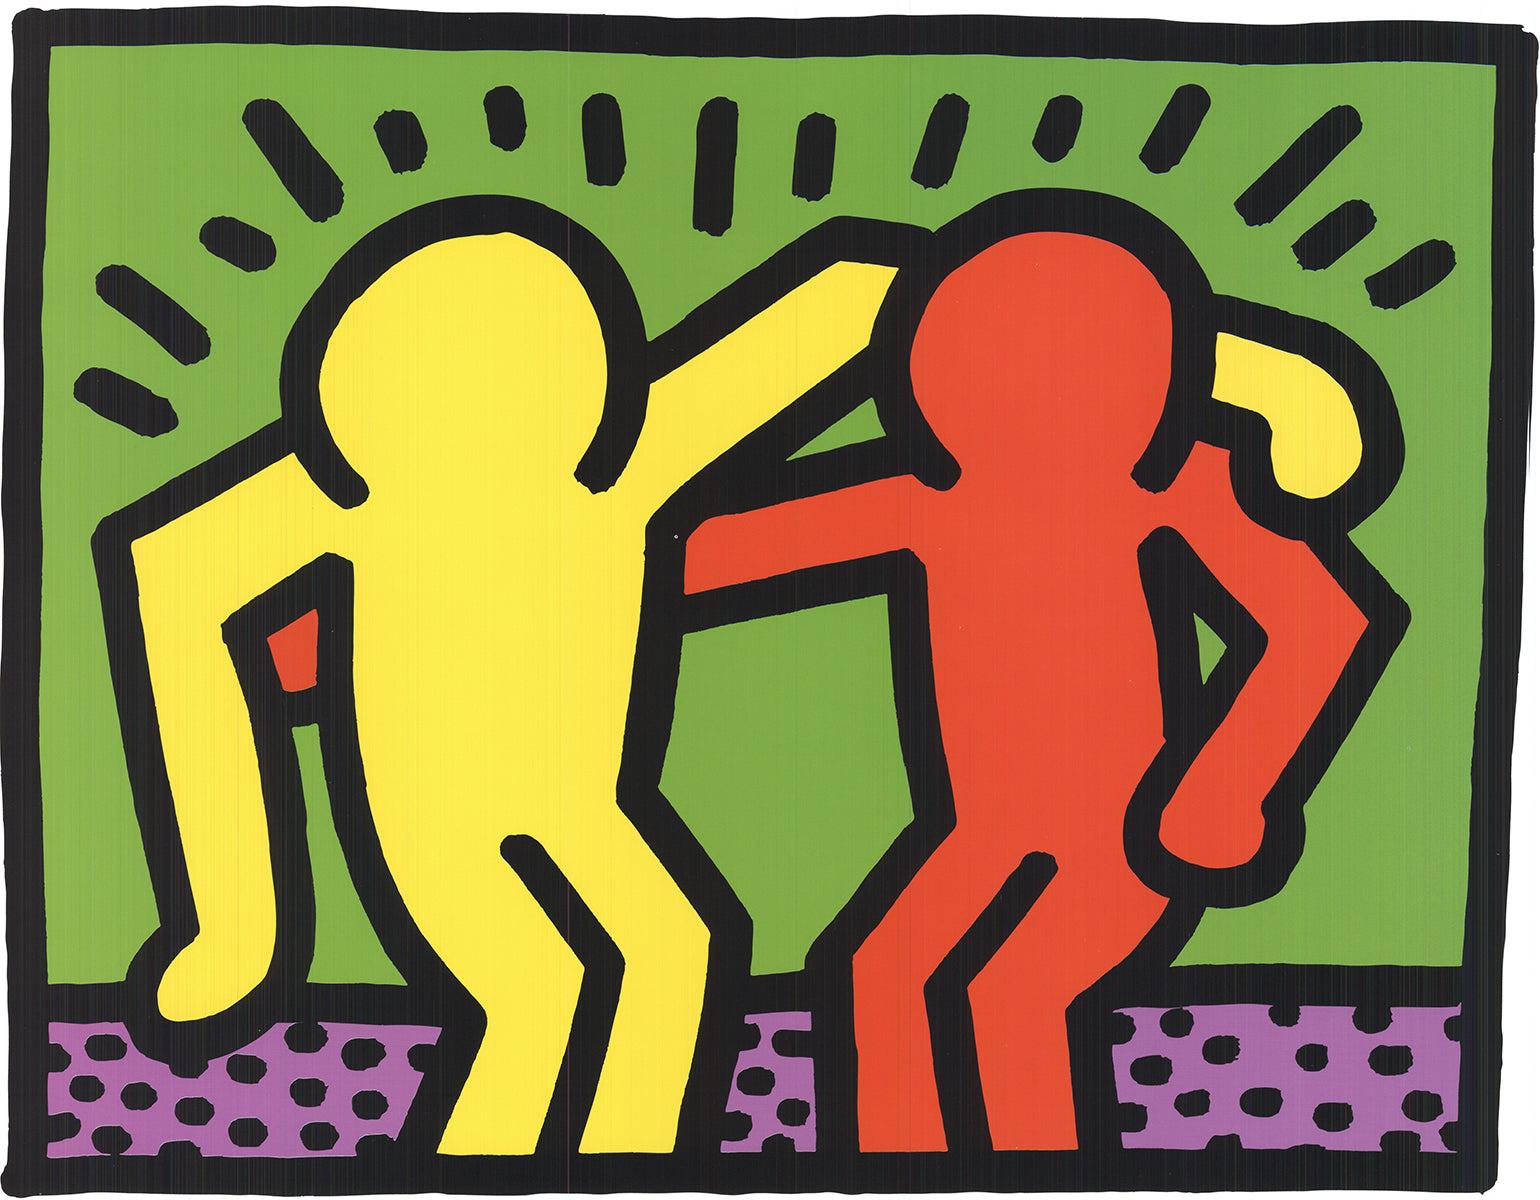 « Untitled (From Pop Shop I) » 2009- Lithographie offset de Keith Haring 1